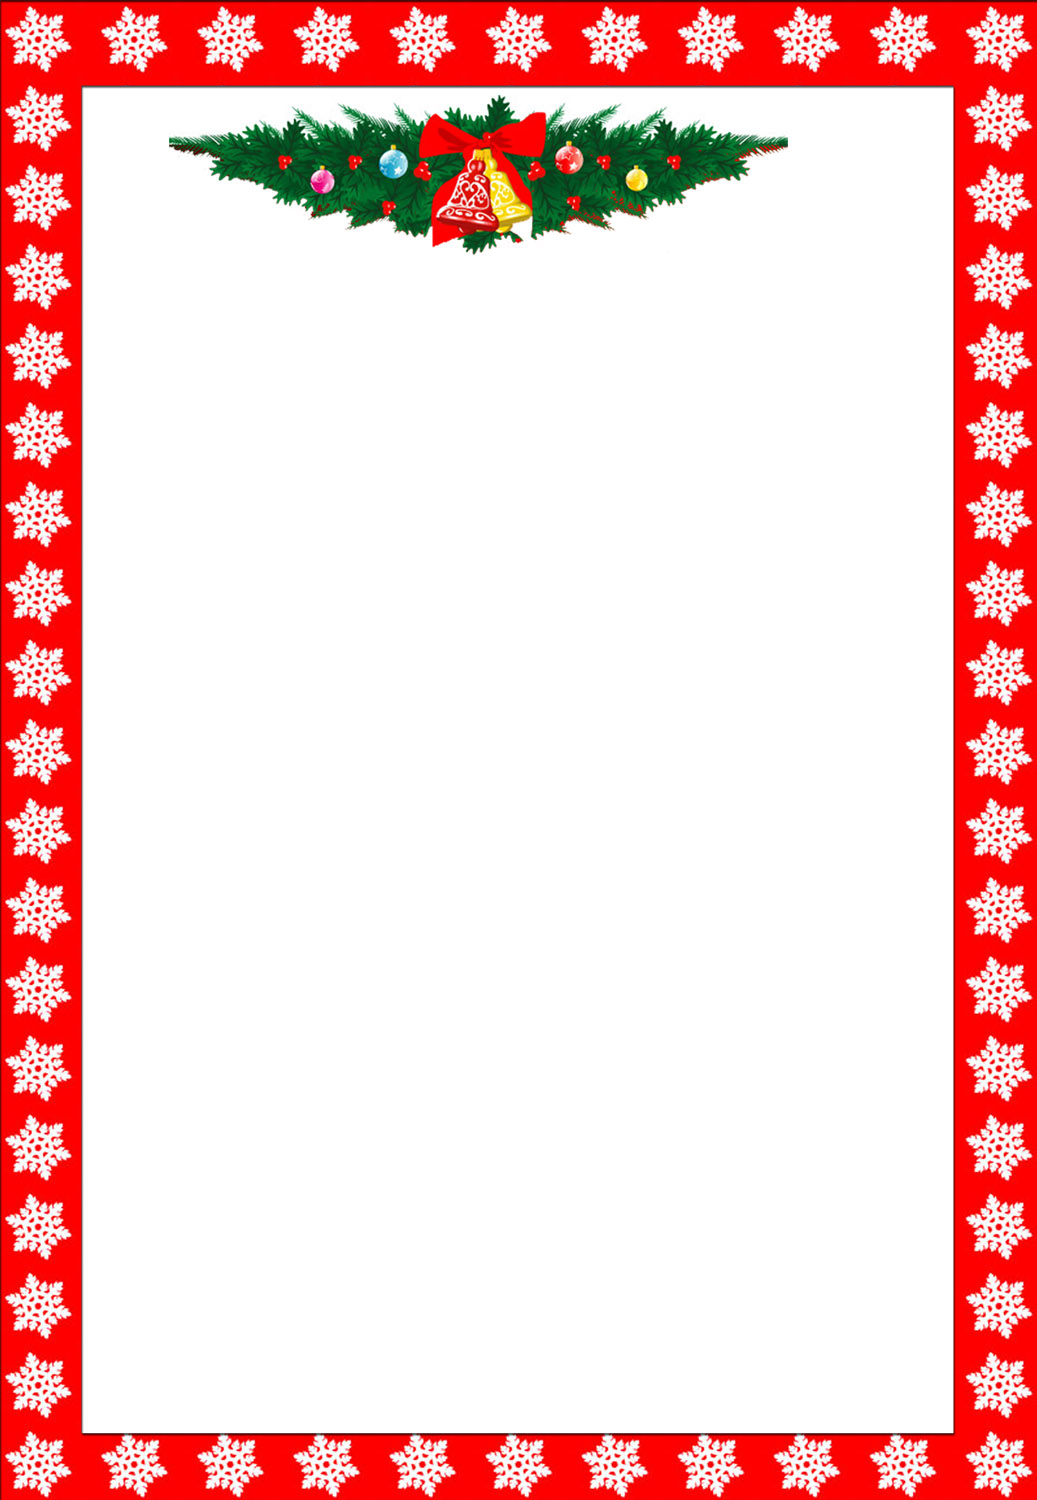 Free Christmas Cliparts Border, Download Free Clip Art, Free Intended For Christmas Border Word Template